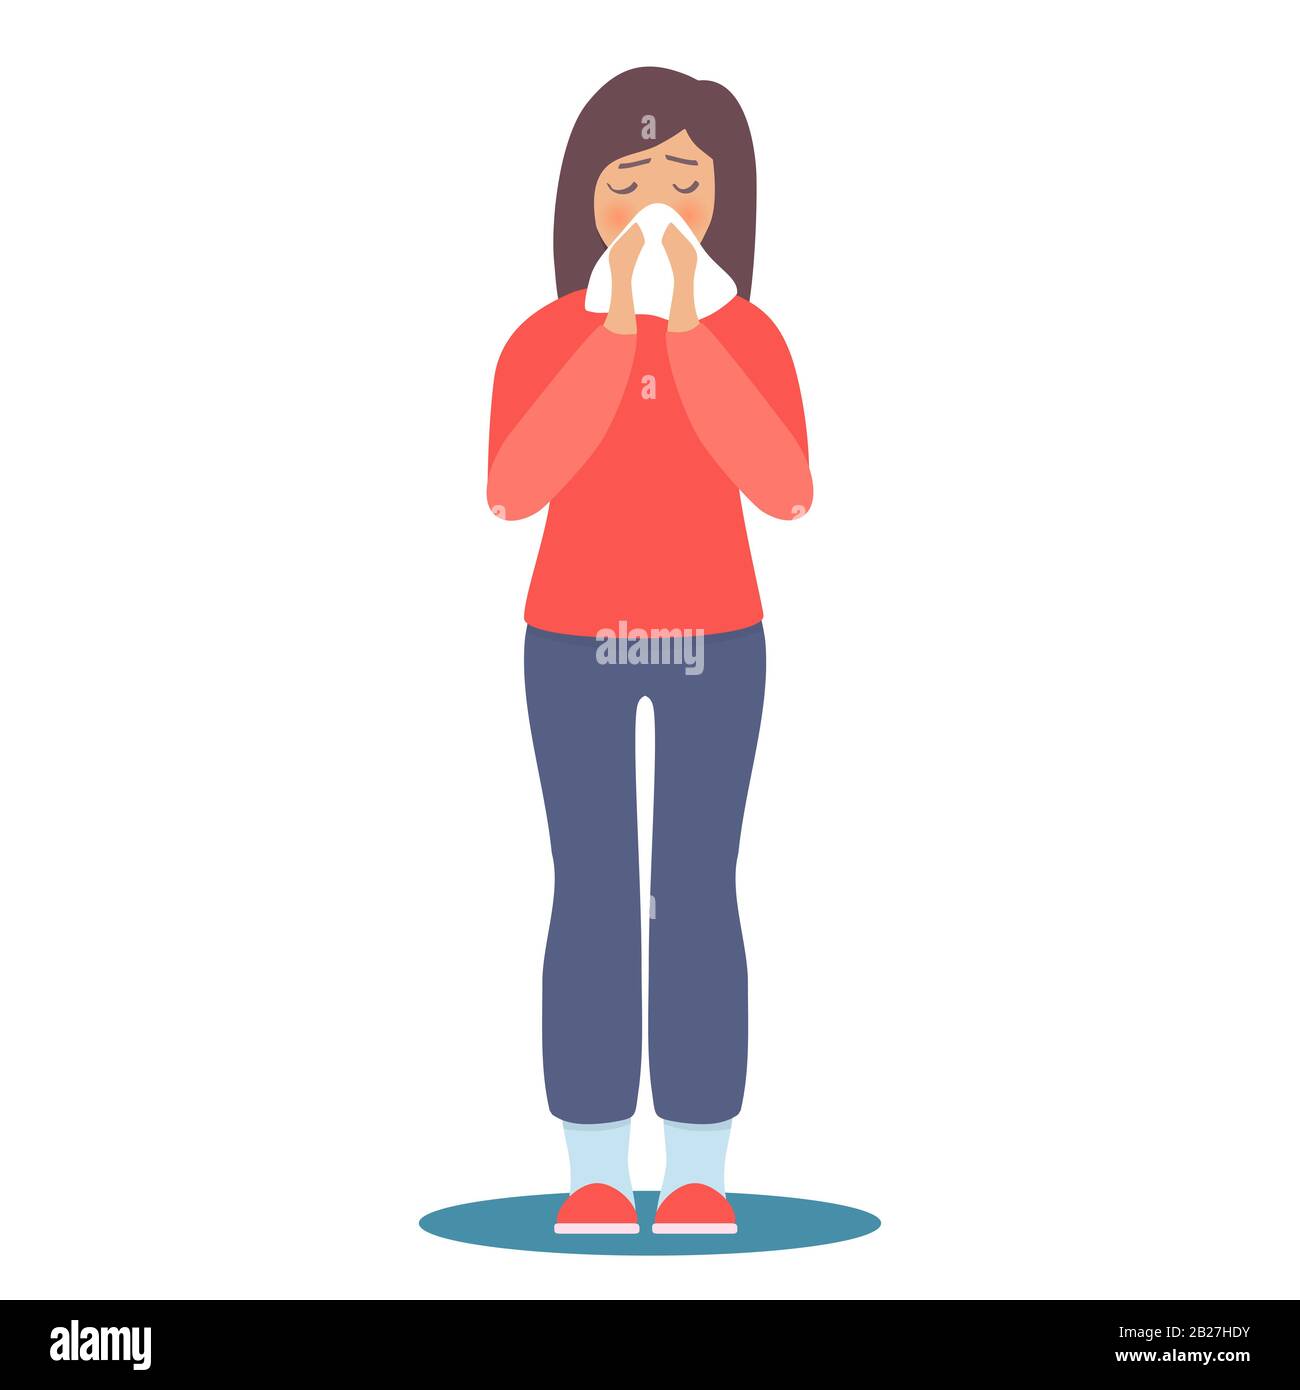 Girl with flu vector illustration. Flat female character sick of seasonal flu. Woman with blows her nose in handkerchief. Epidemic, illness, disease, Stock Vector